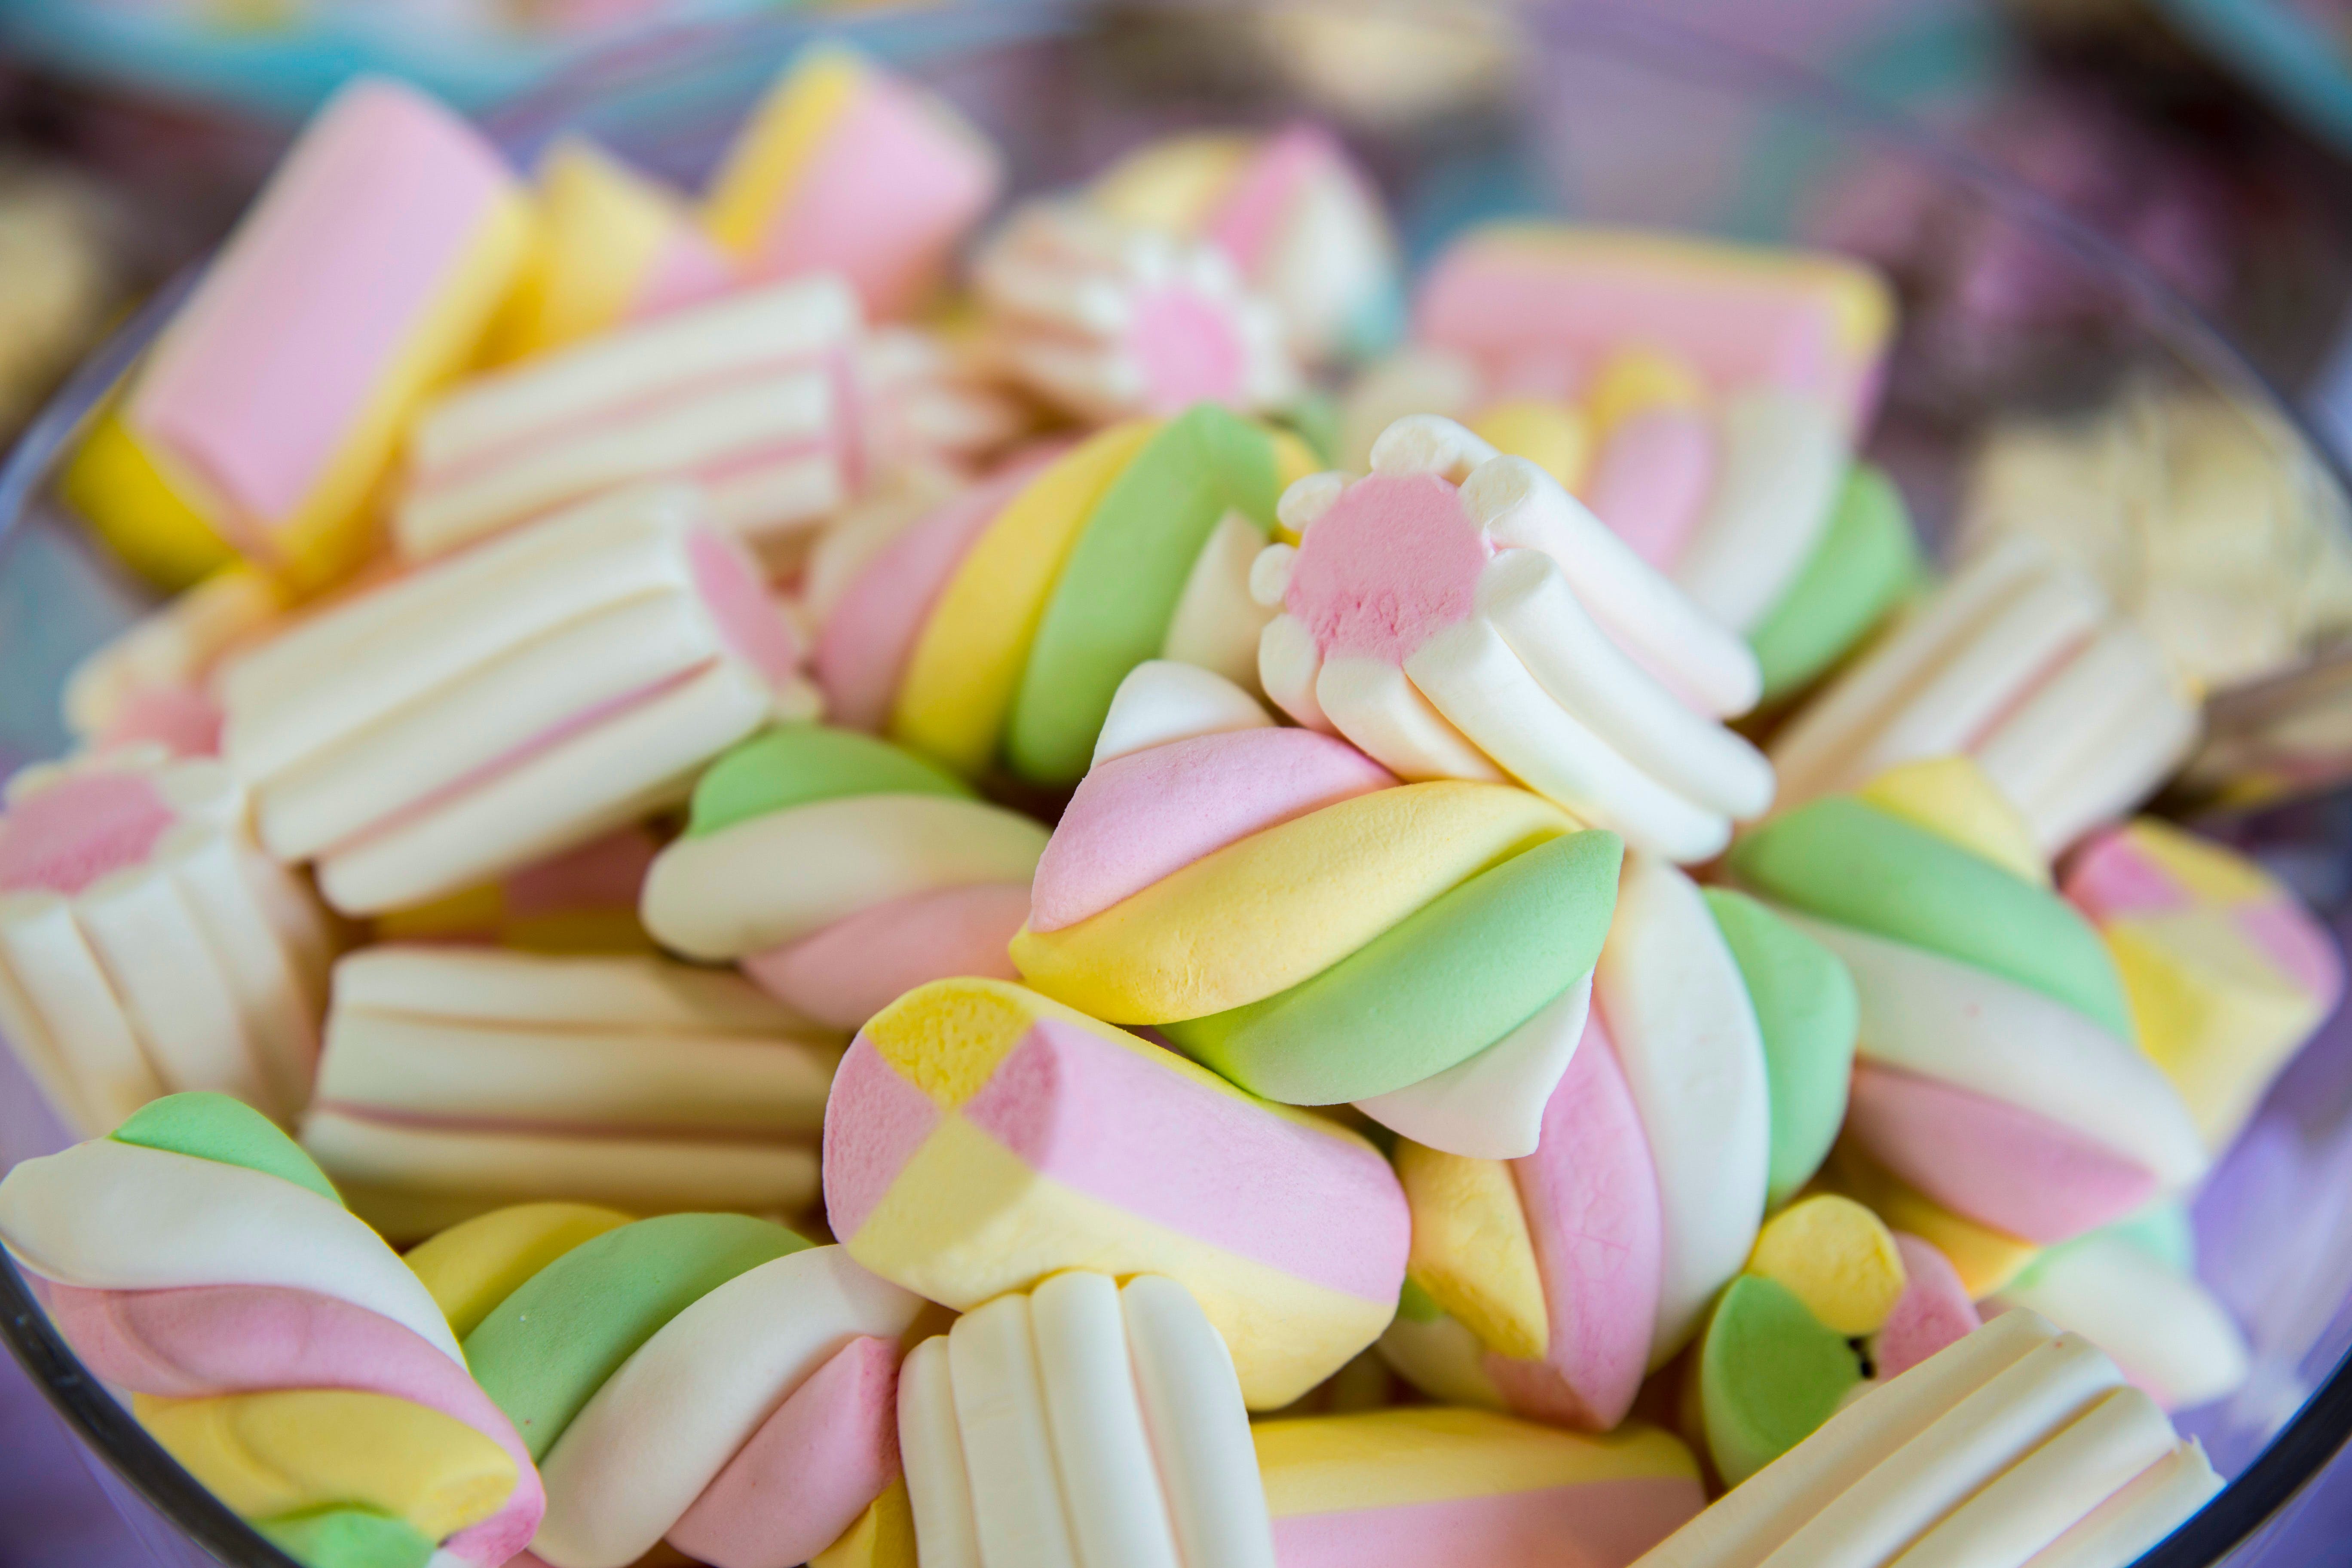 A bowl of marshmallows | Source: Pexels